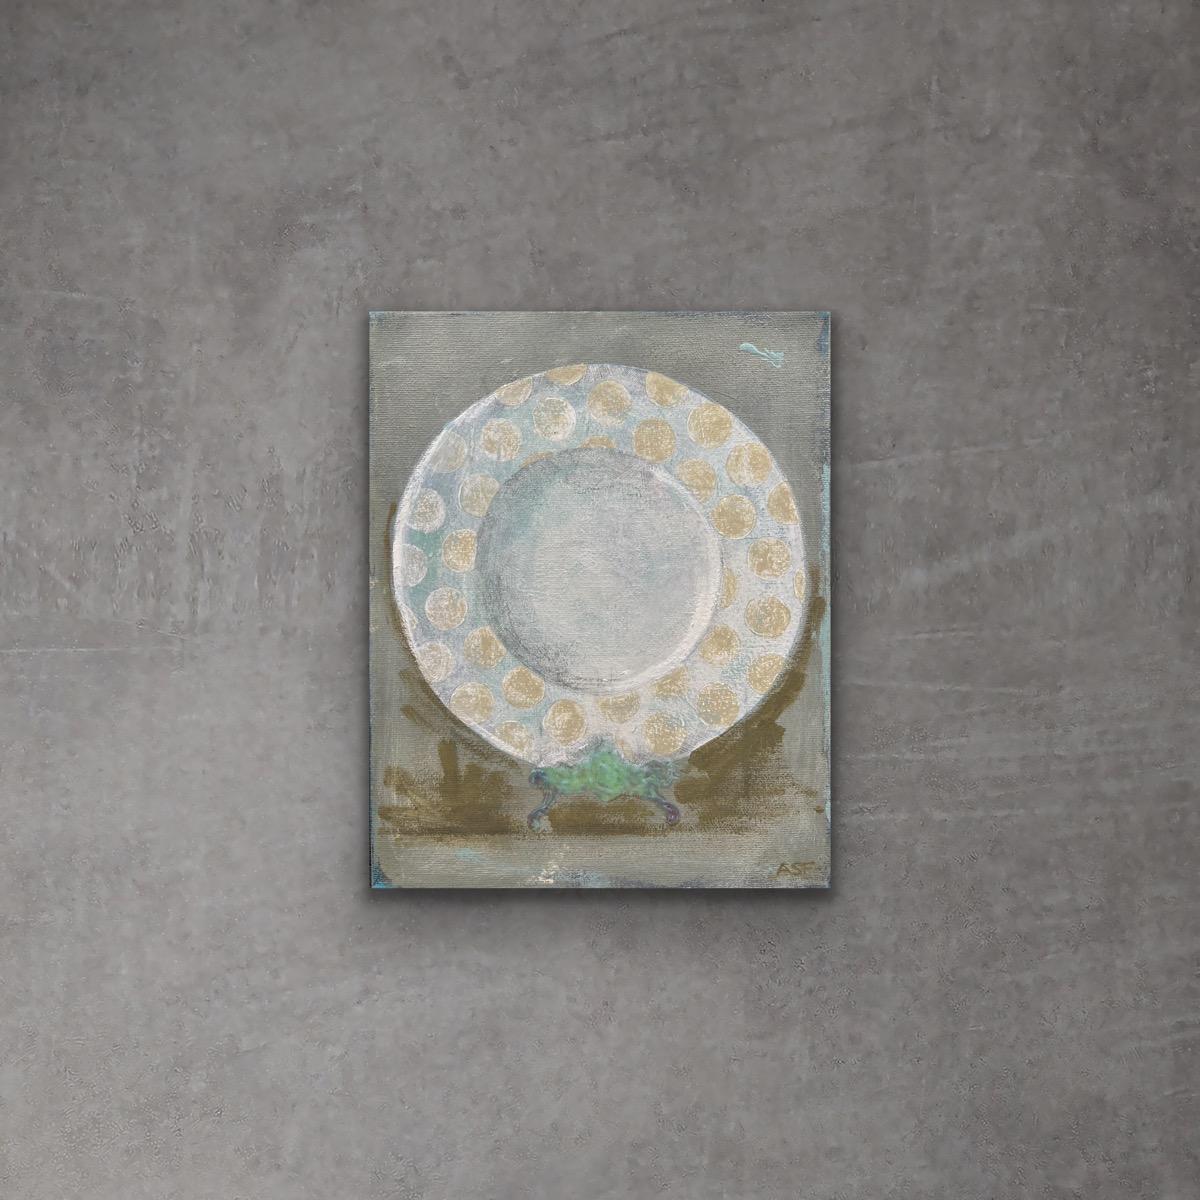 Dinner Plate 2 - 8"x10", Still Life Painting On Canvas, Muted Green, White